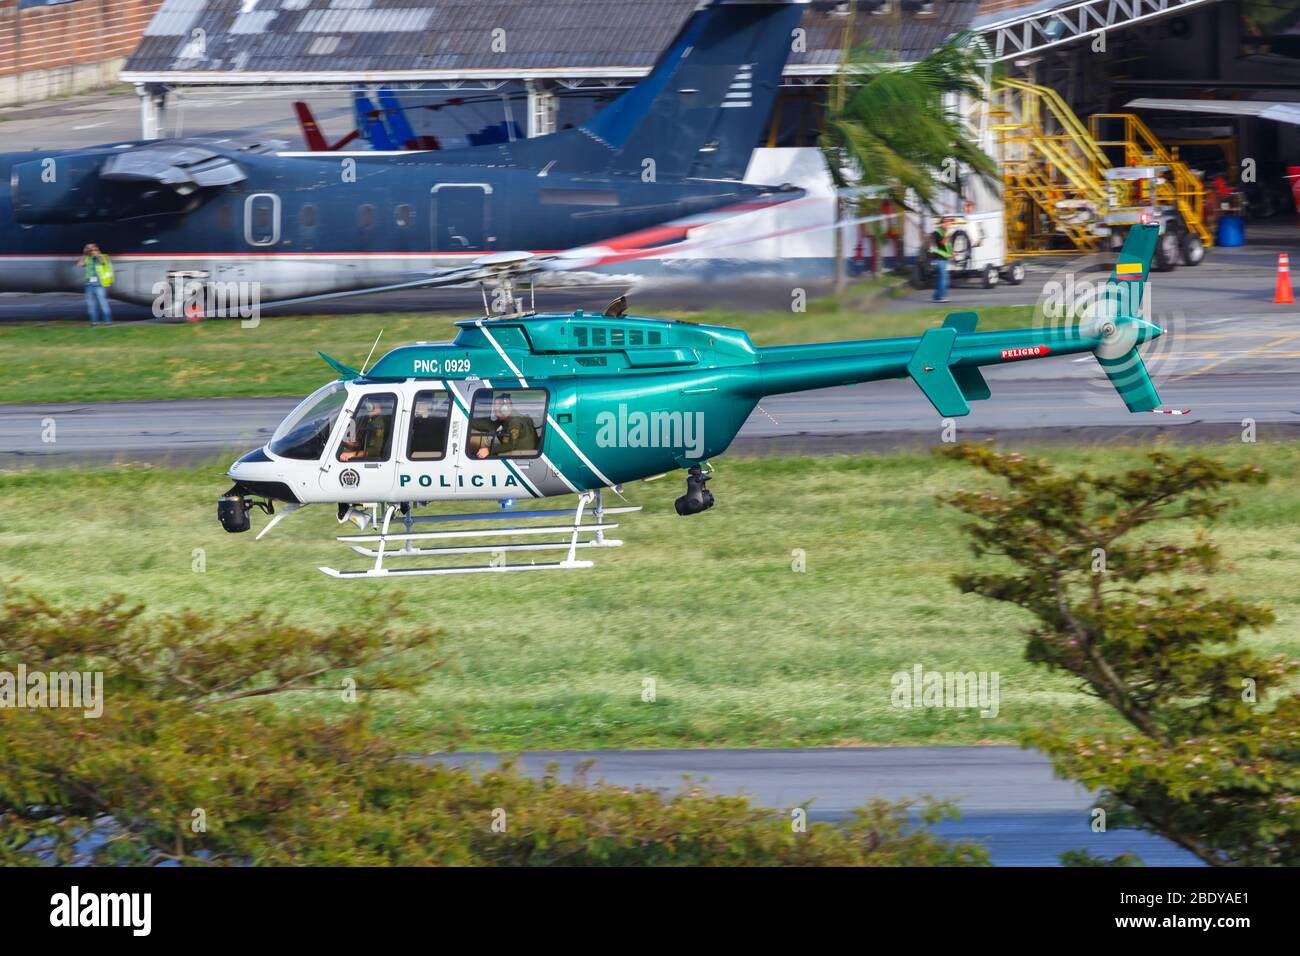 Medellin, Colombia – January 25, 2019: Policia Nacional de Colombia Bell 407 helicopter at Medellin Enrique Olaya Herrera airport (EOH) in Colombia. Stock Photo